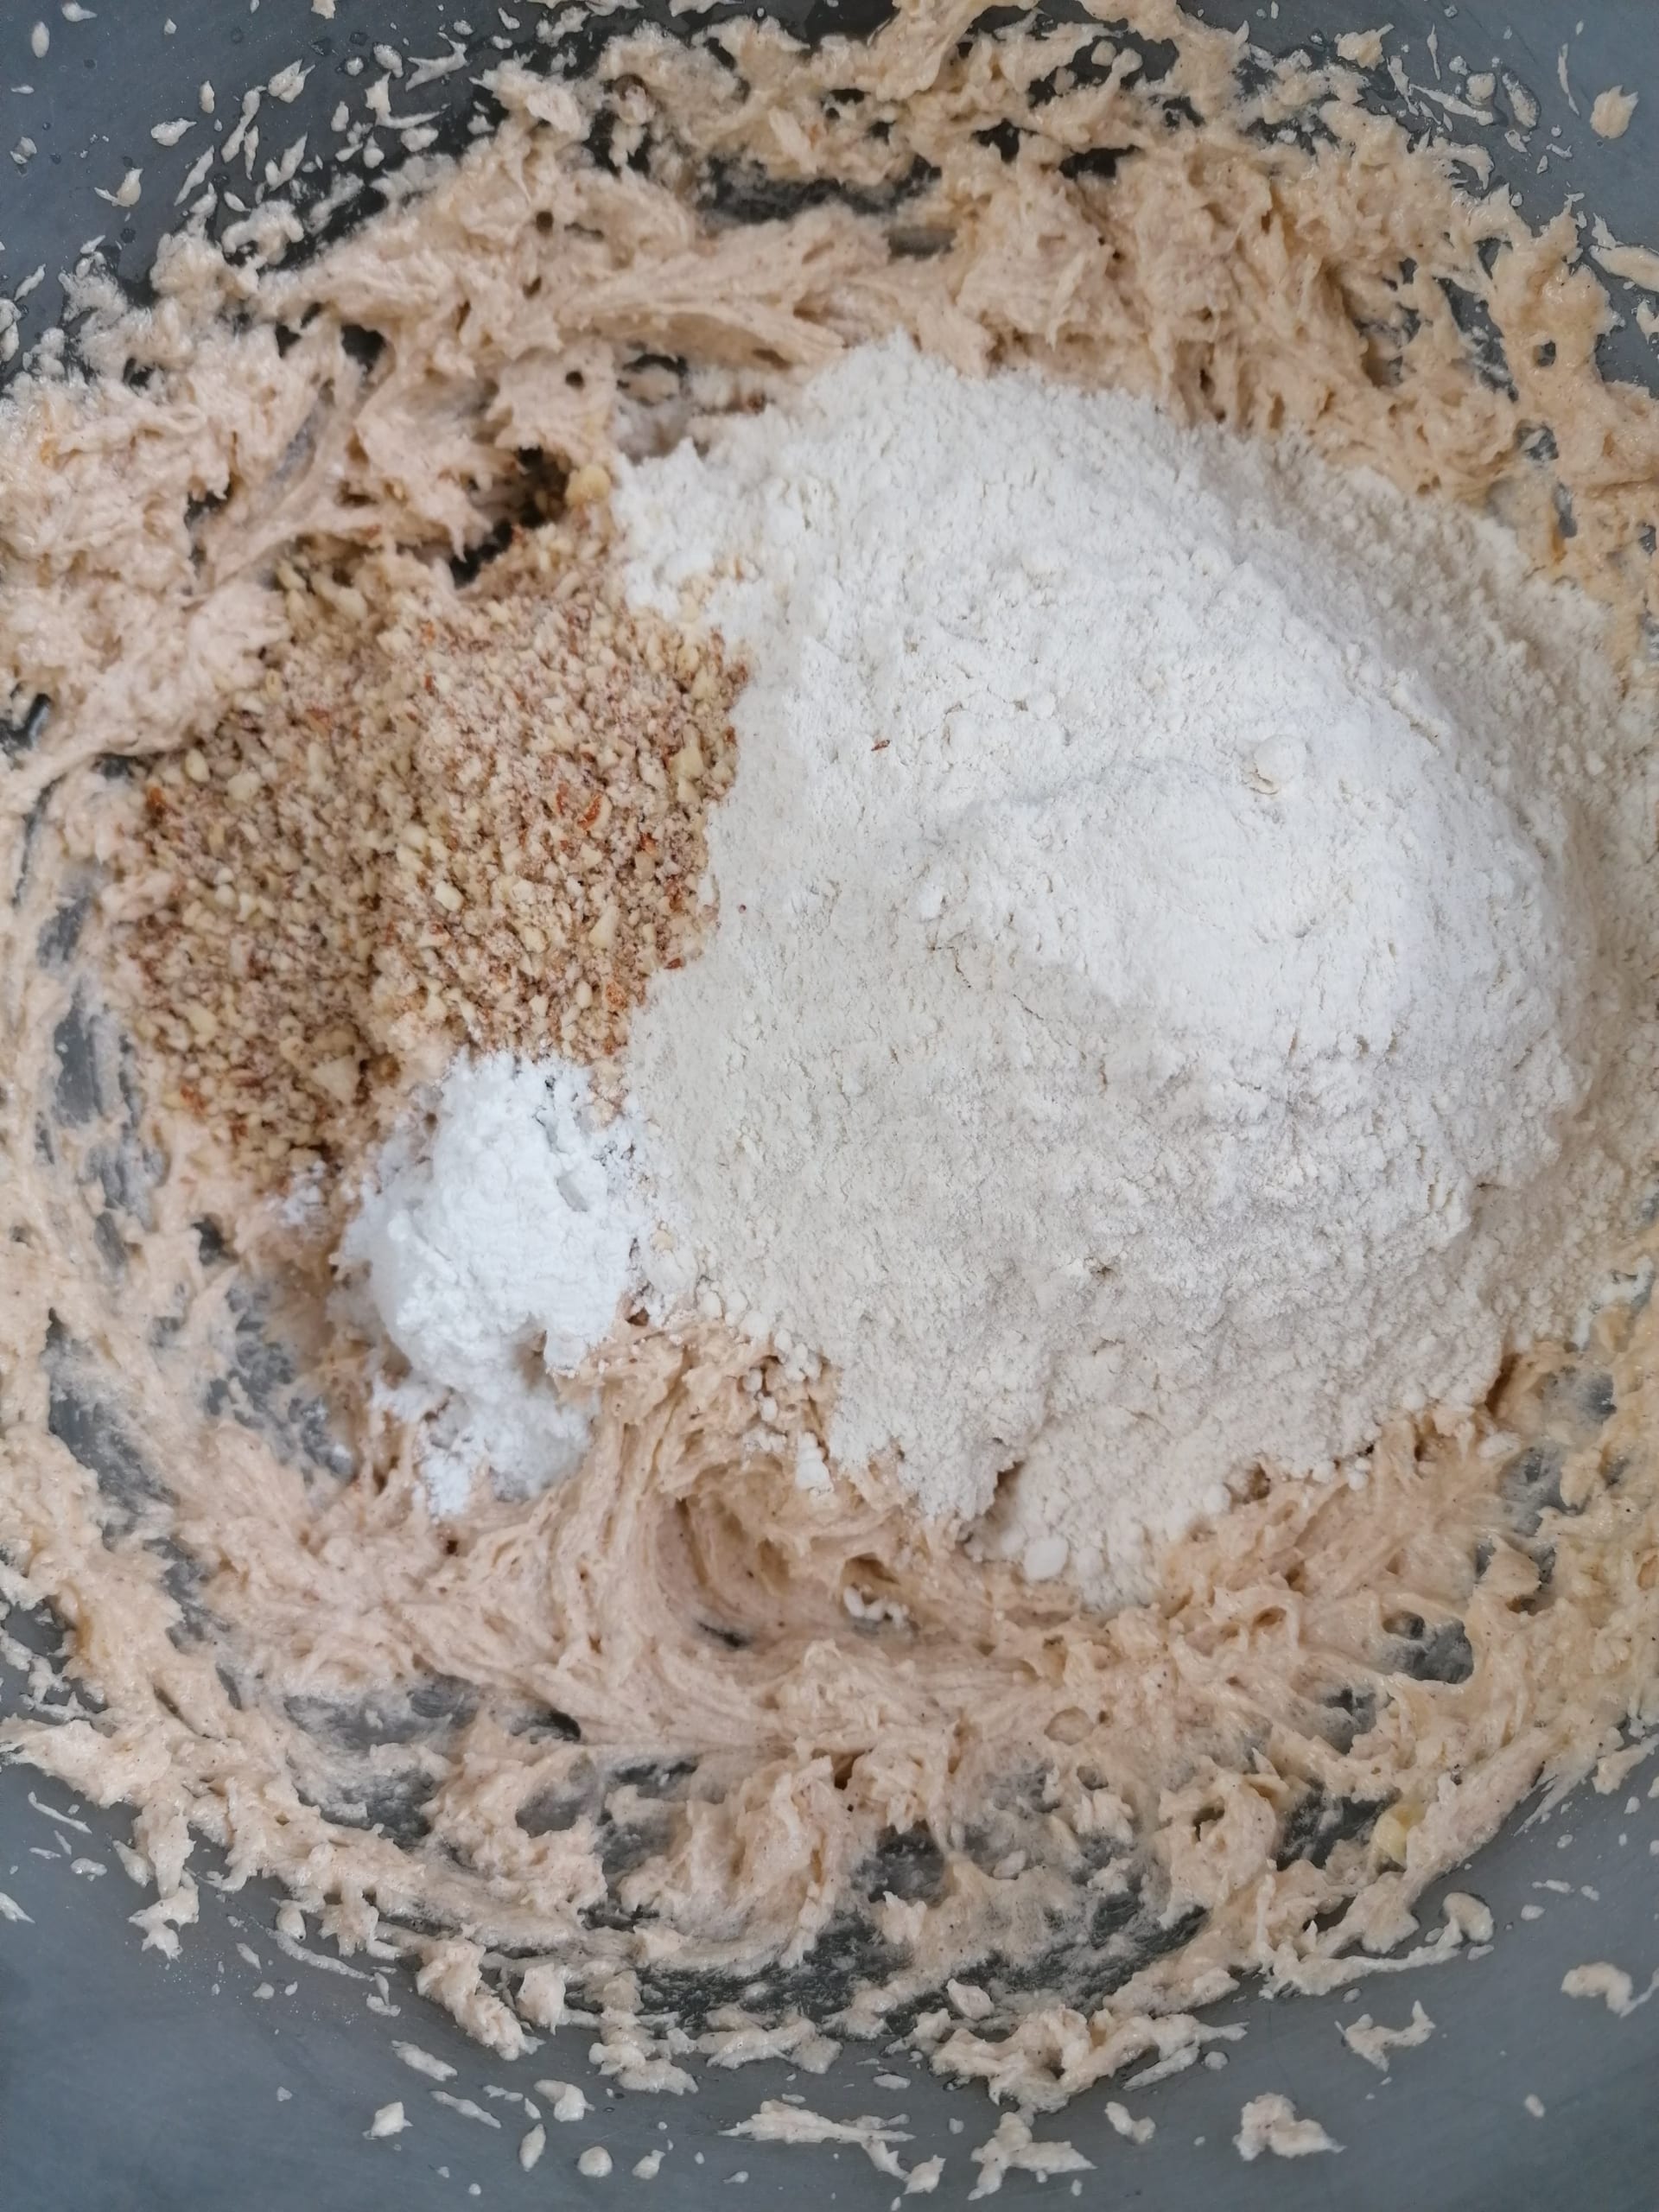 Creamed cake mix with flour & ground almonds ready to be stirred together